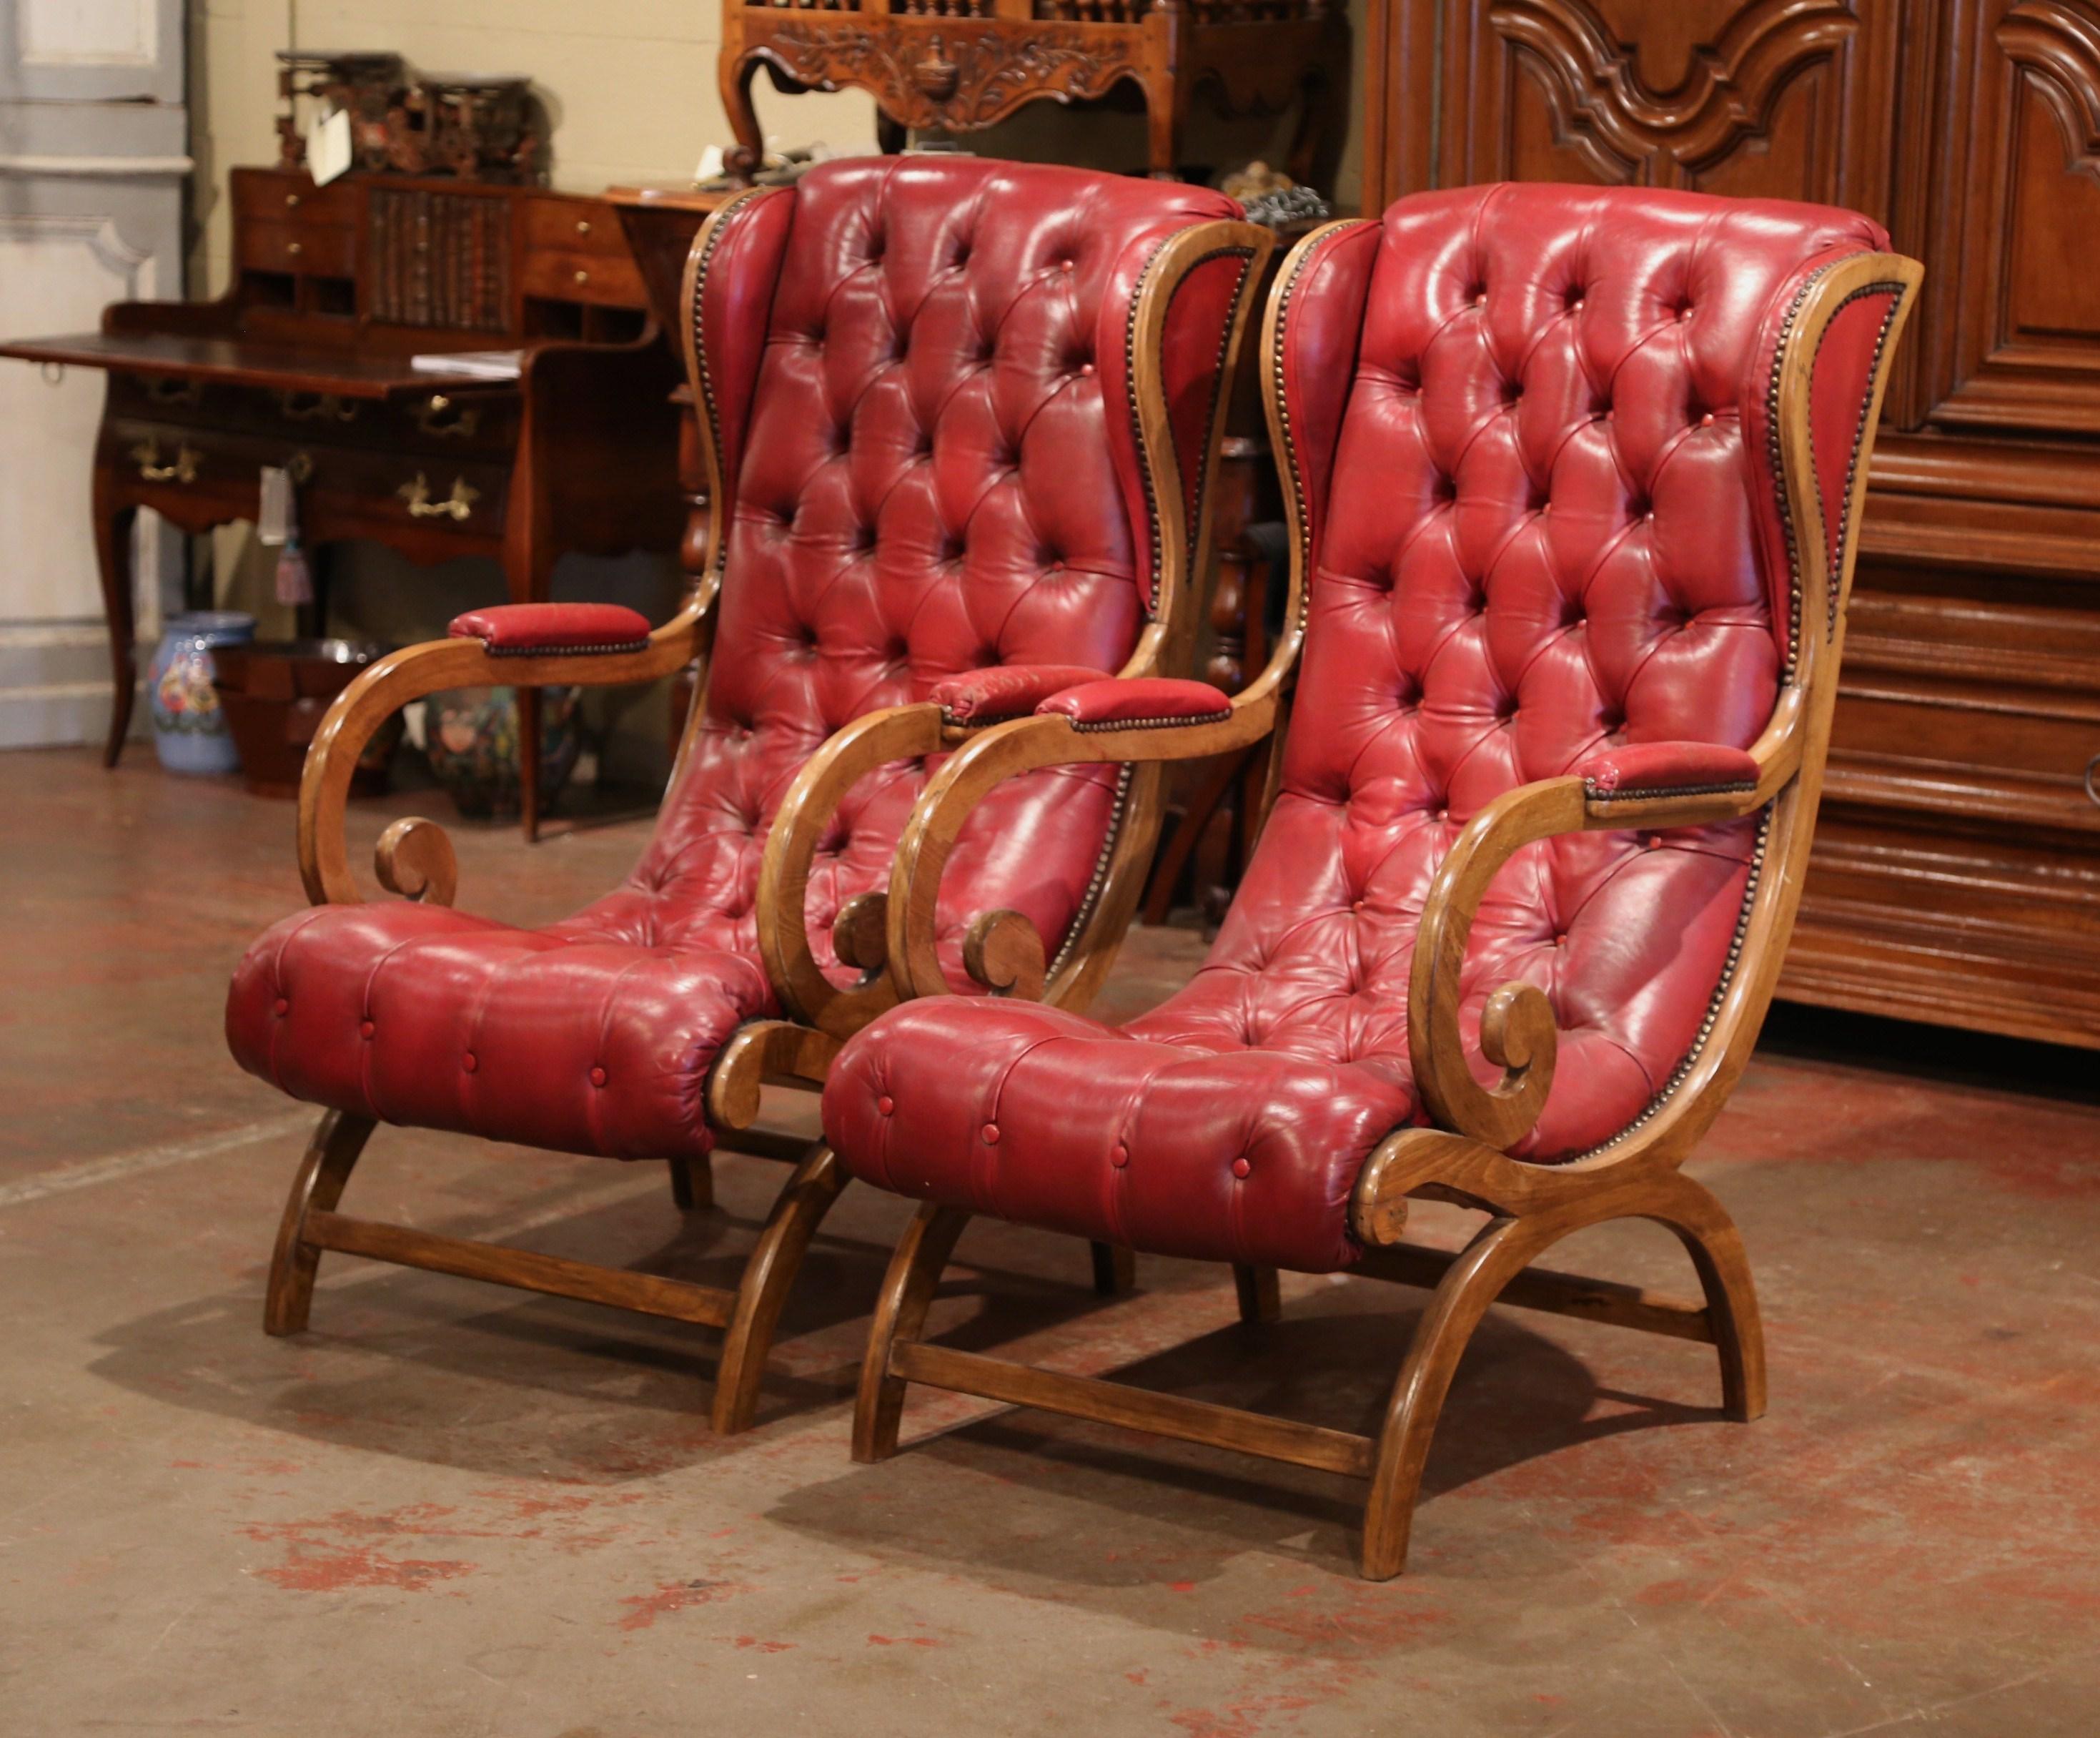 This elegant pair of vintage armchairs was crafted in France, circa 1950. The oversized fruitwood club chairs have a tall, comfortable back with ears and dramatic, curving, upholstered armrests. The chairs both have curved legs in the rounded half